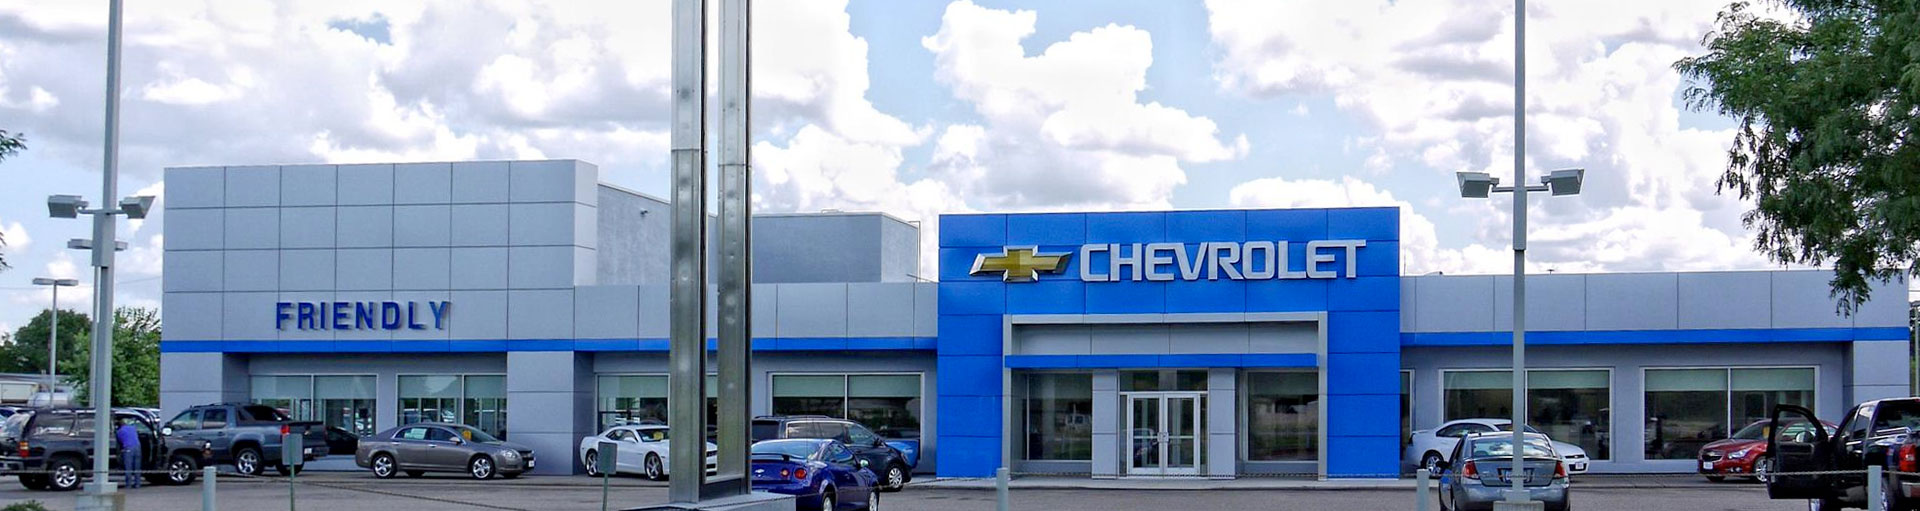 Friendly Chevrolet Why Service Here